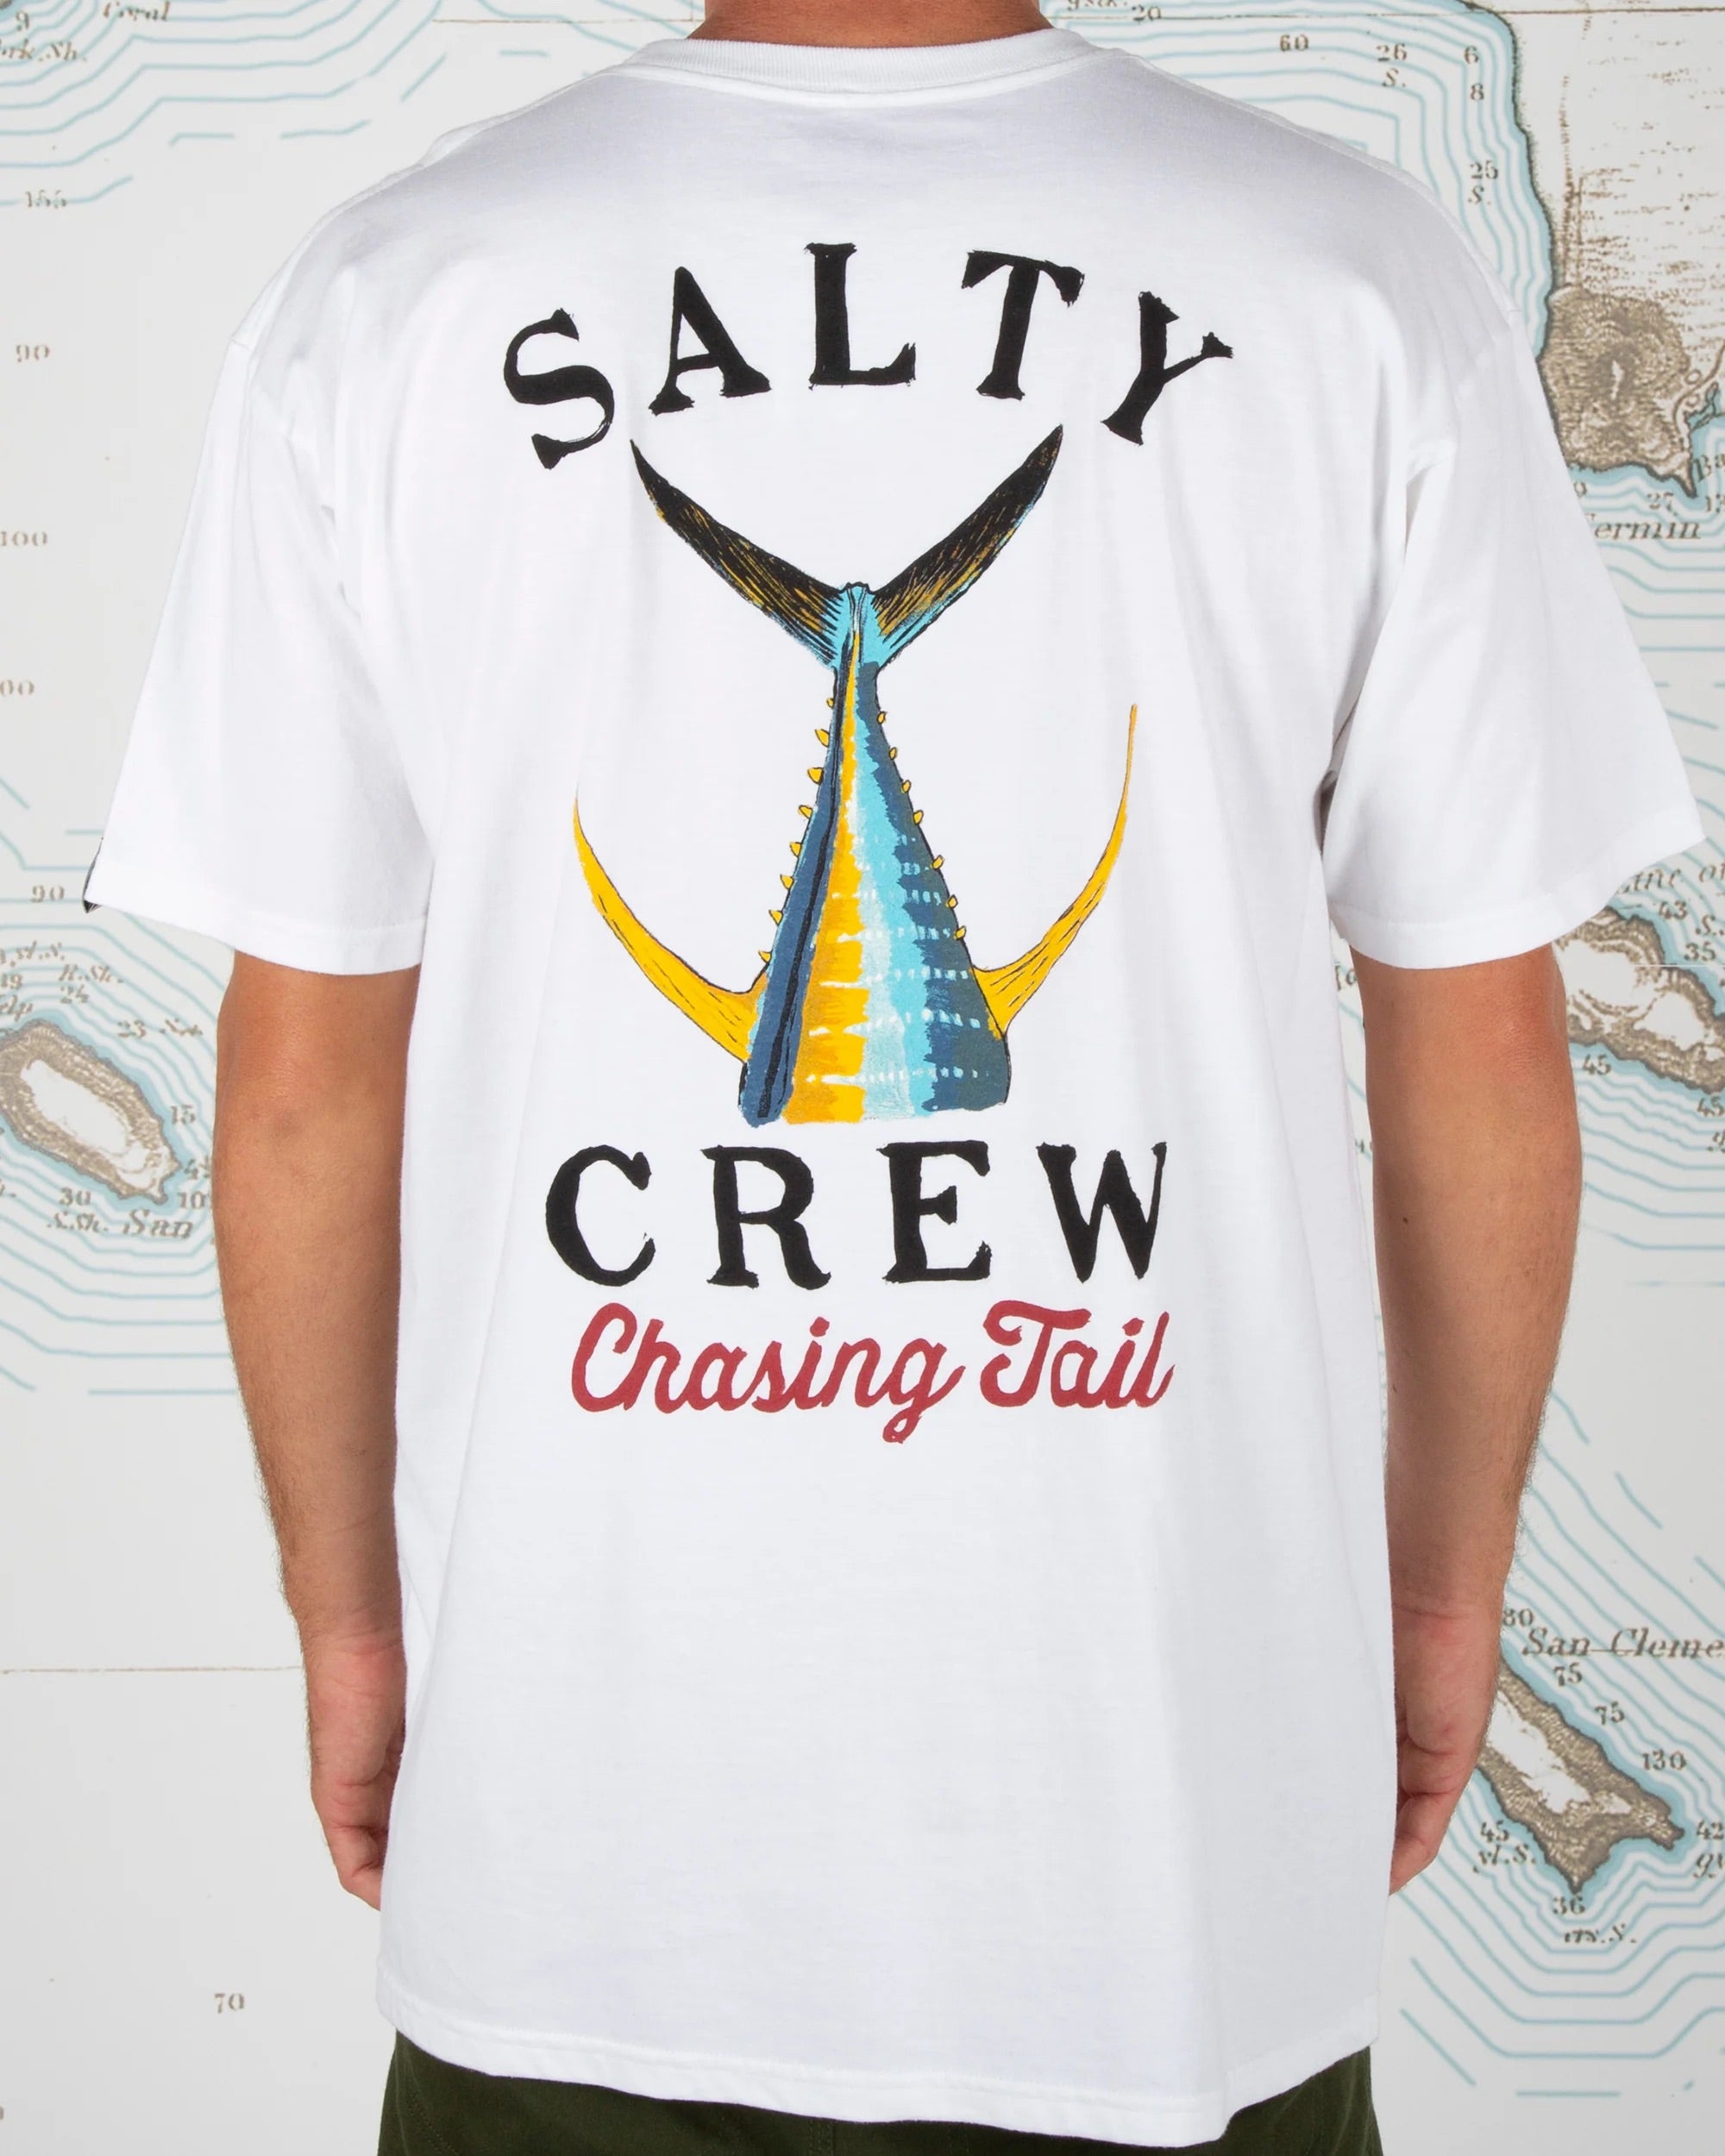 Salty Crew - Tailed Classic SS T-Shirt